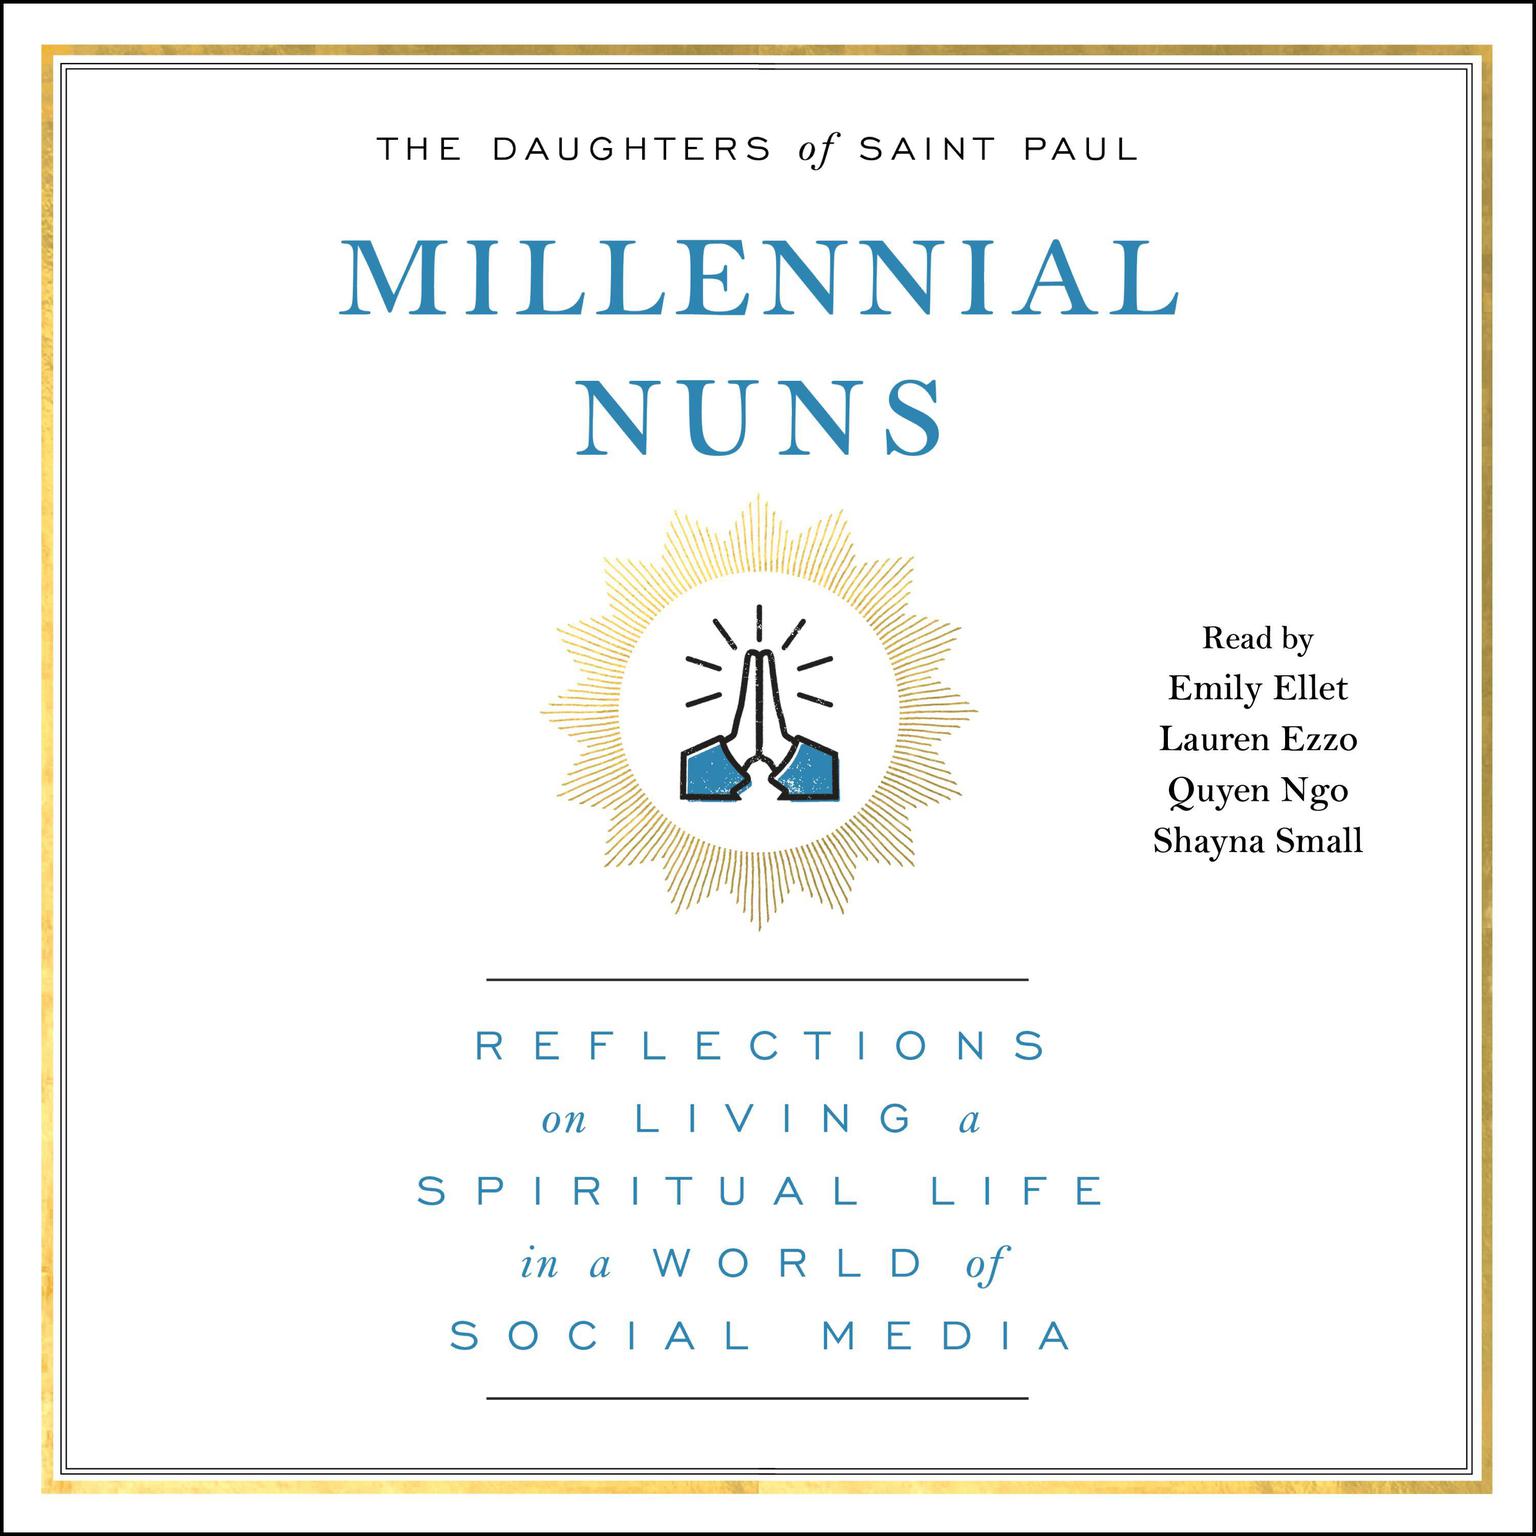 Millennial Nuns: Reflections on Living a Spiritual Life in a World of Social Media Audiobook, by The Daughters of Saint Paul